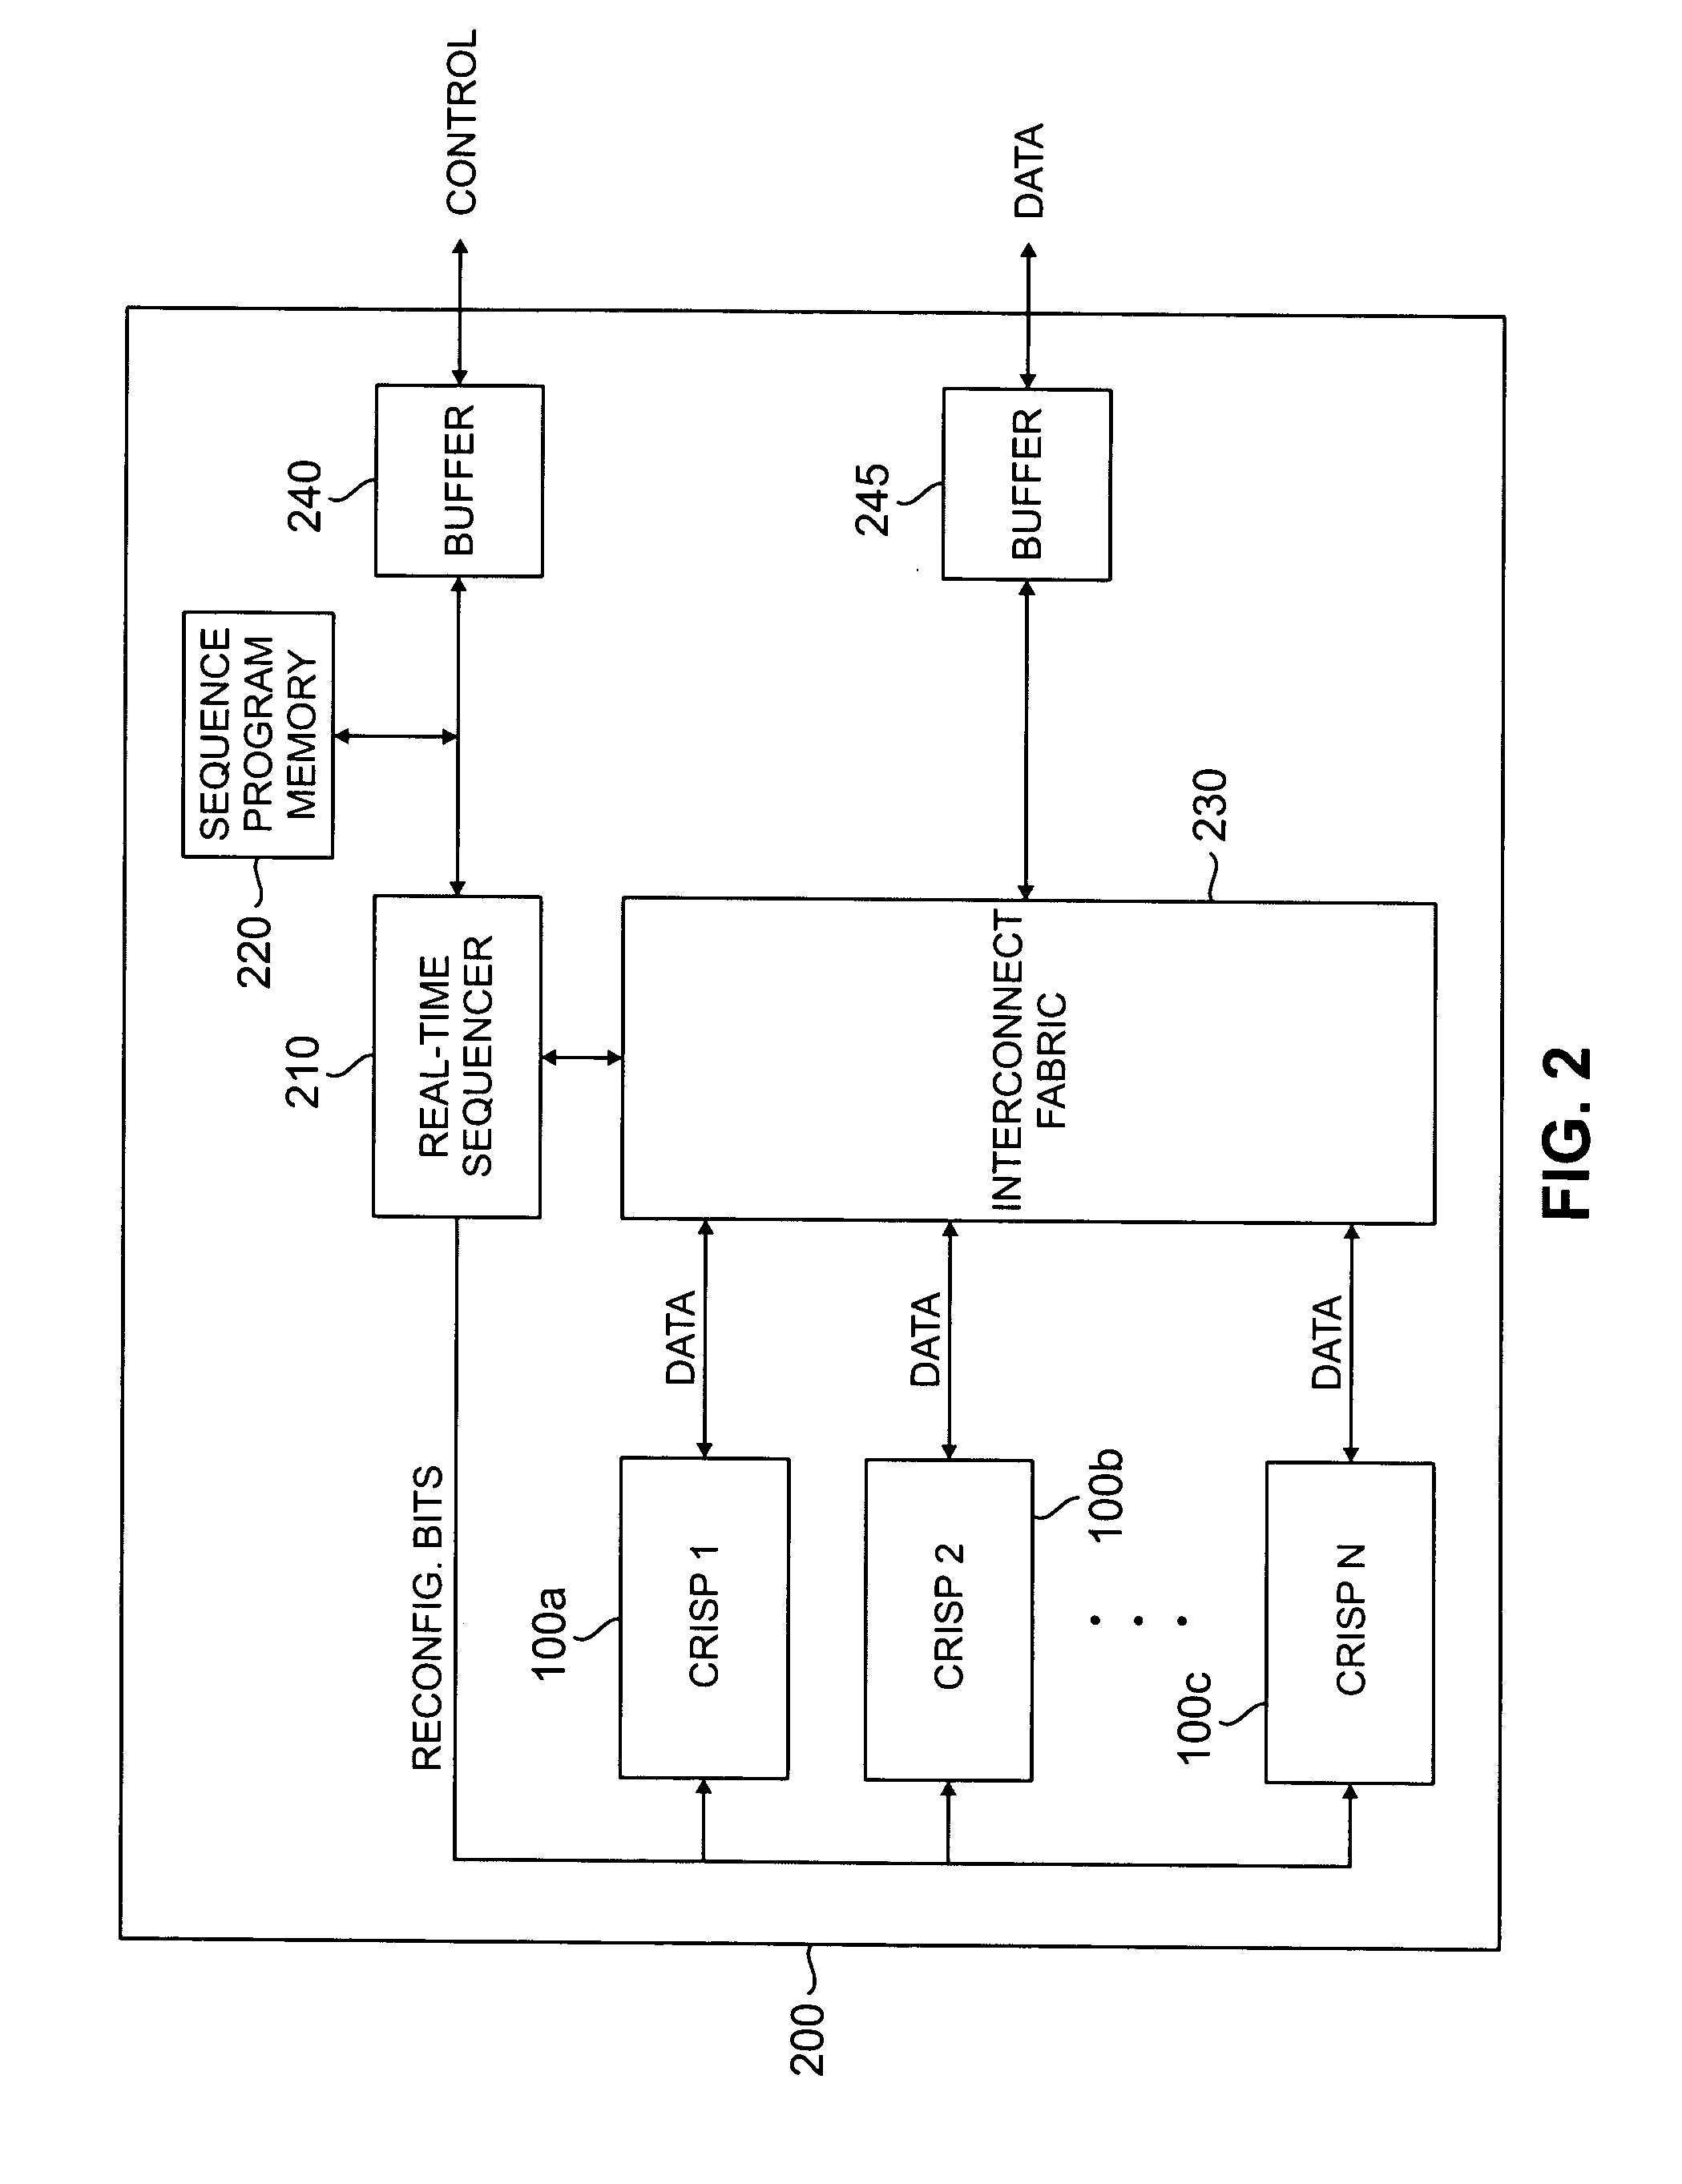 Unified stopping criteria for binary and duobinary turbo decoding in a software-defined radio system